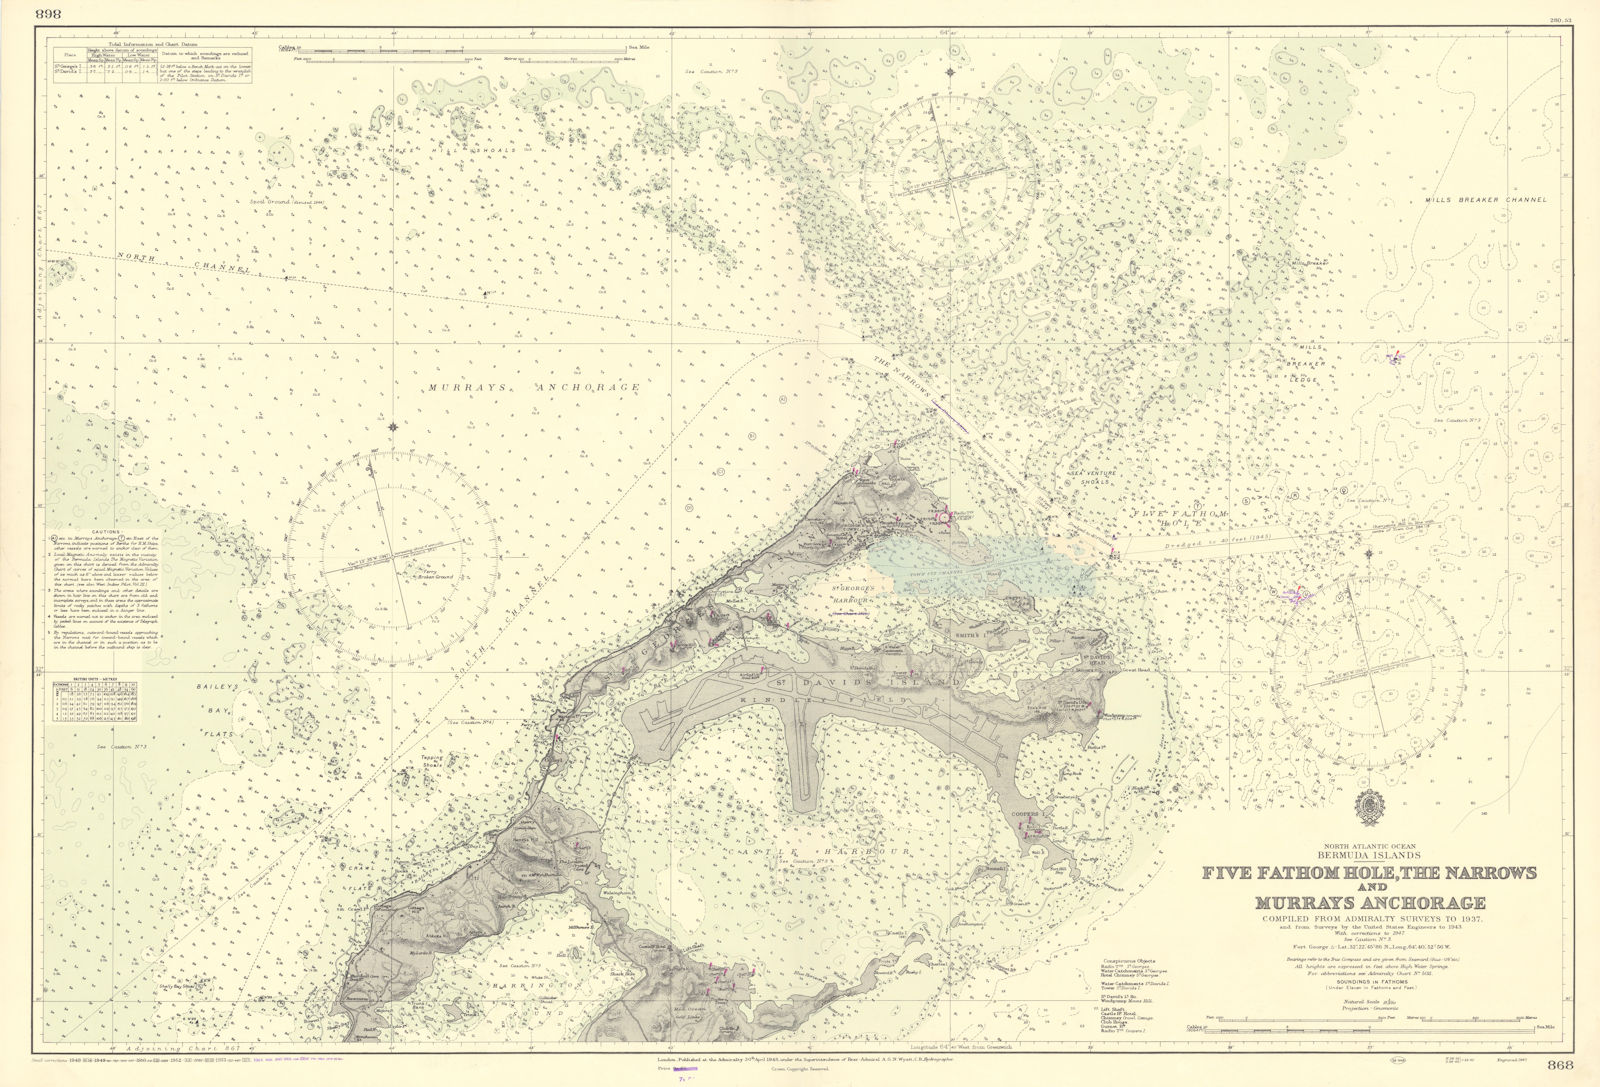 Associate Product Bermuda 5 Fathom Hole Narrows Murrays Anchorage ADMIRALTY chart 1948 (1956) map